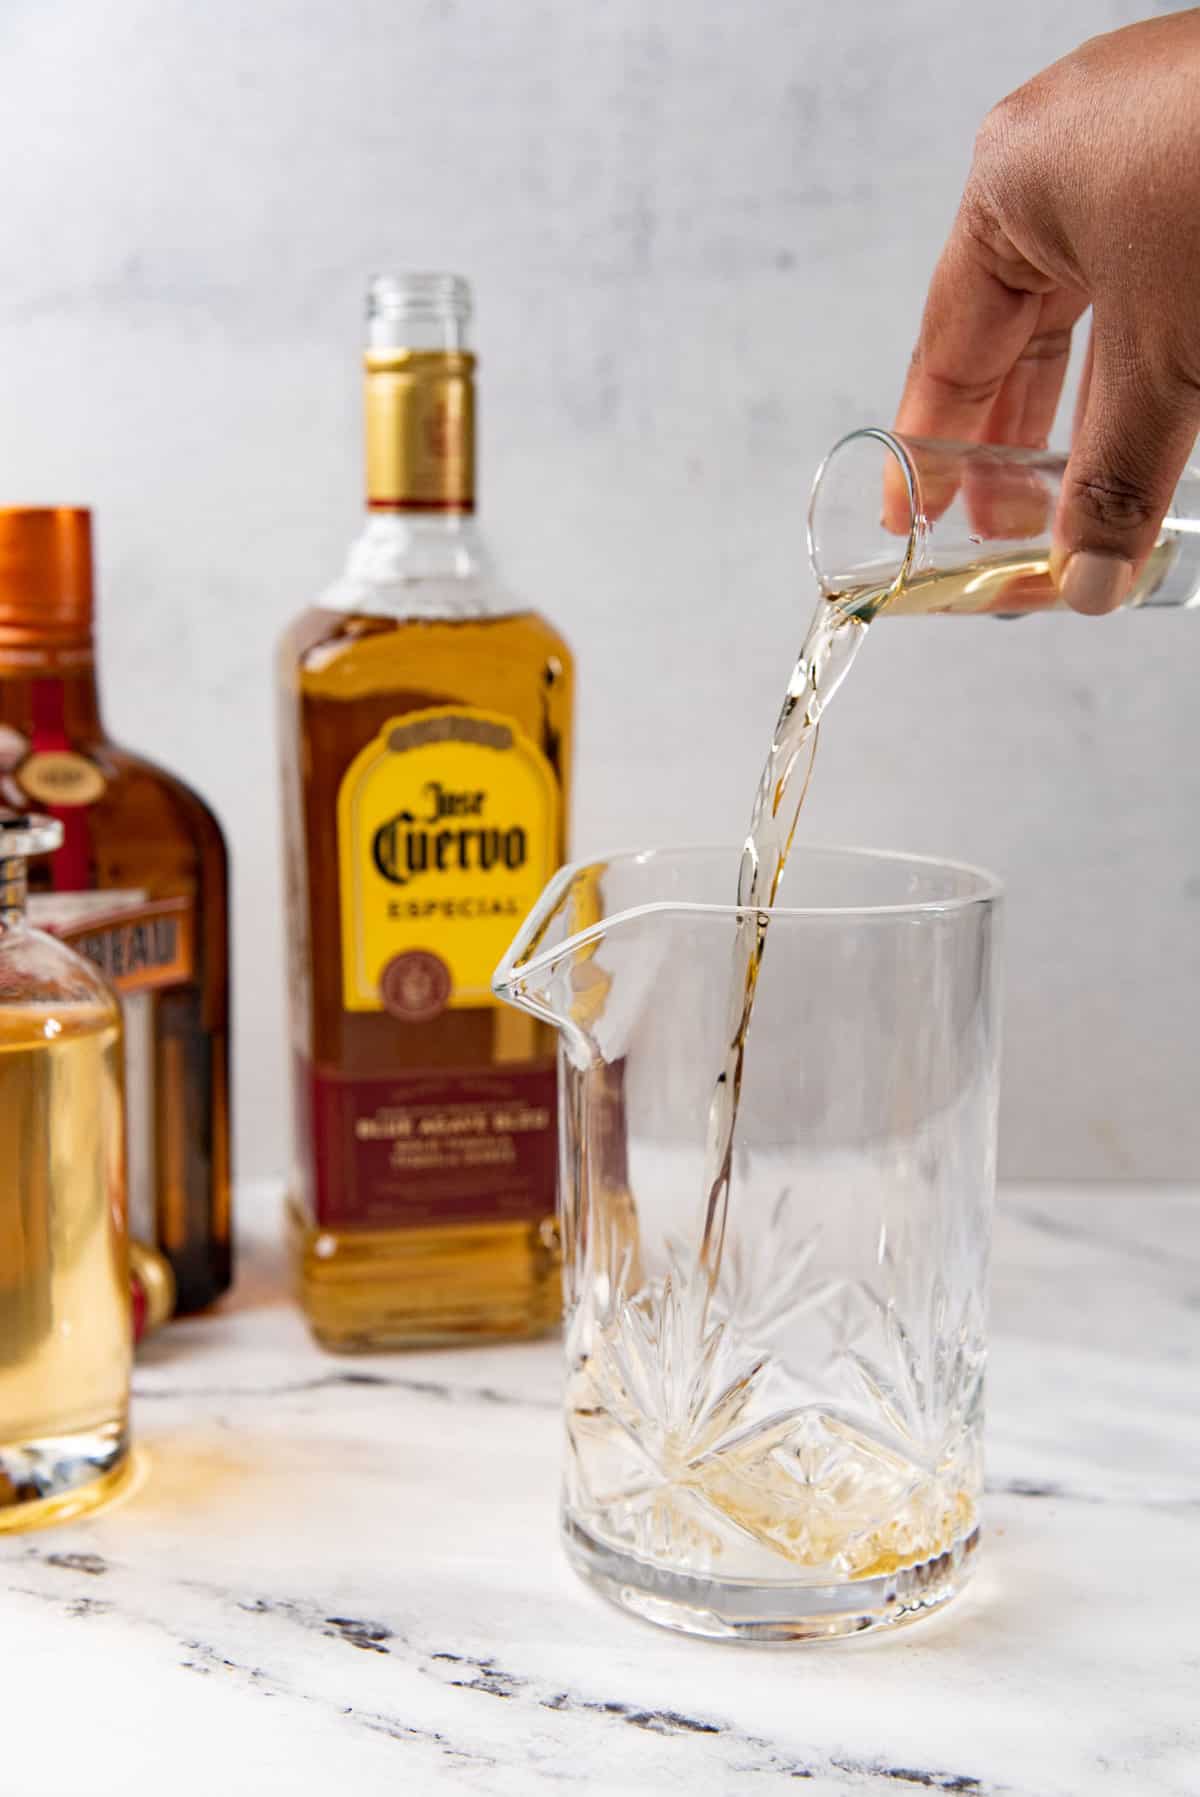 Pouring tequila into the cocktail mixing glass to make spicy margarita.